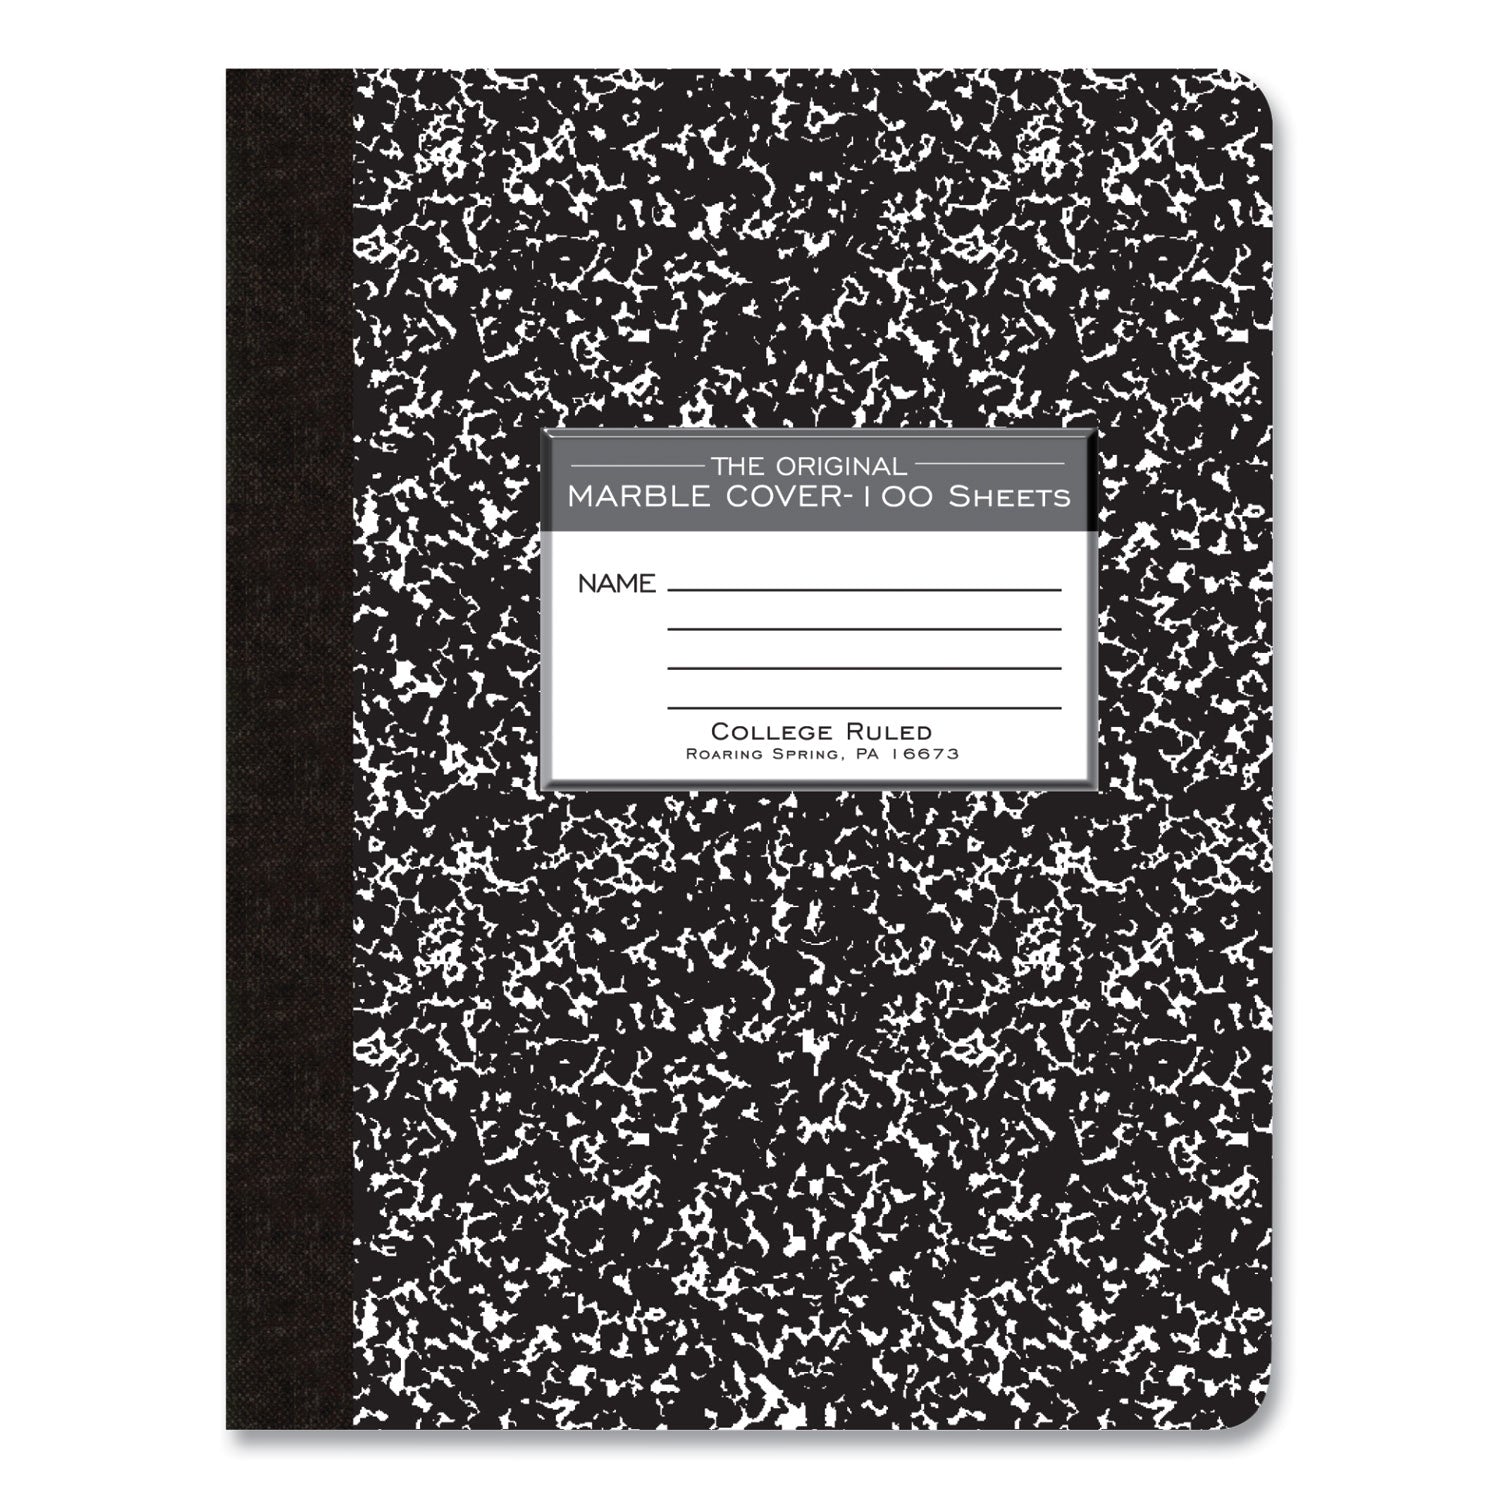 hardcover-marble-composition-book-med-college-rule-black-marble-cover-100-975-x-75-sheet-24-ct-ships-in-4-6-bus-days_roa77264cs - 2